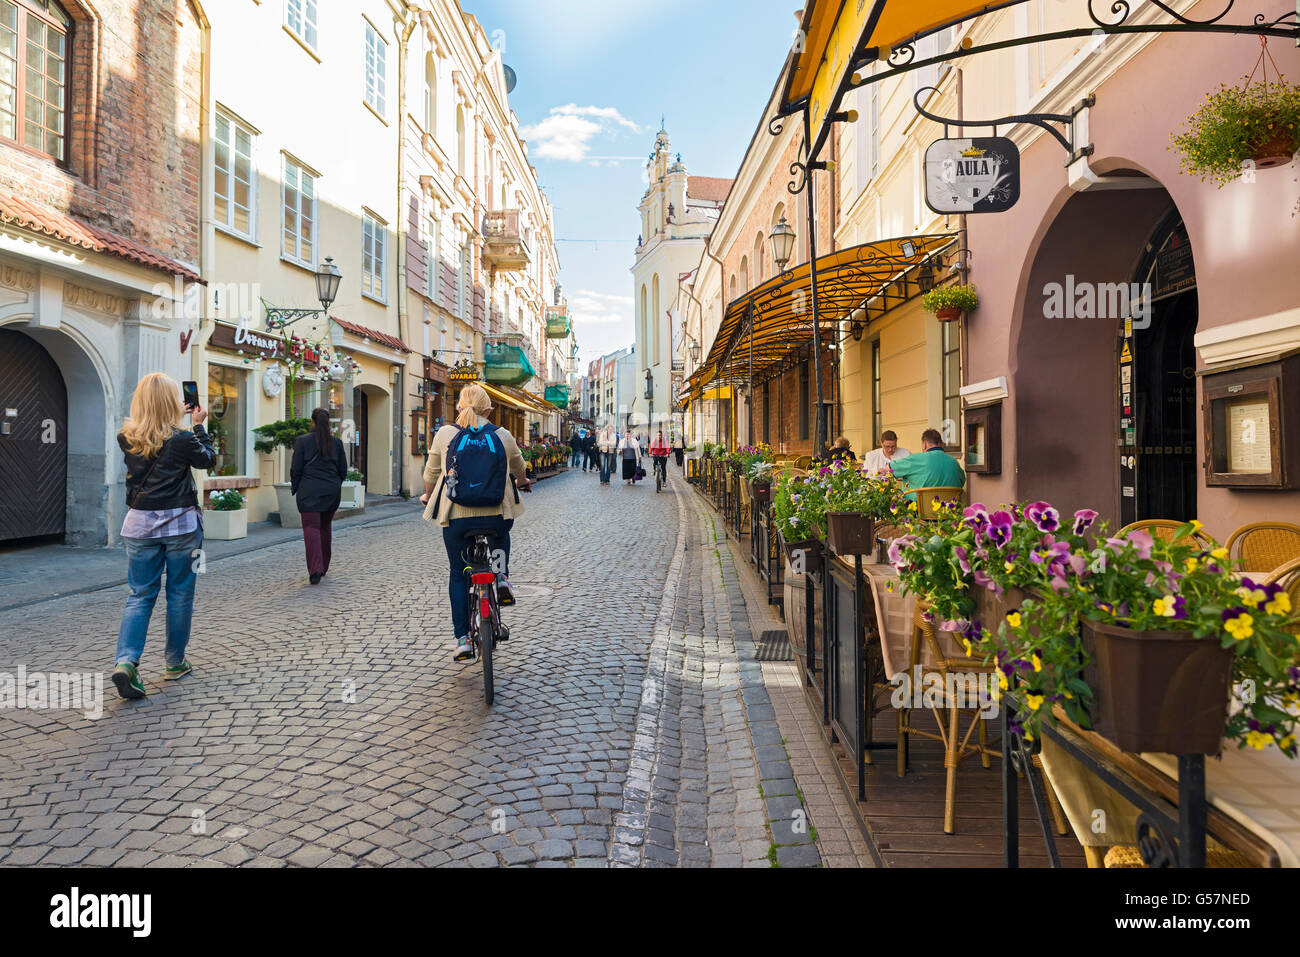 VILNIUS, LITHUANIA - JUNE 7, 2016: Unidentified people walk in the historic center of the city on a sunny spring day Stock Photo